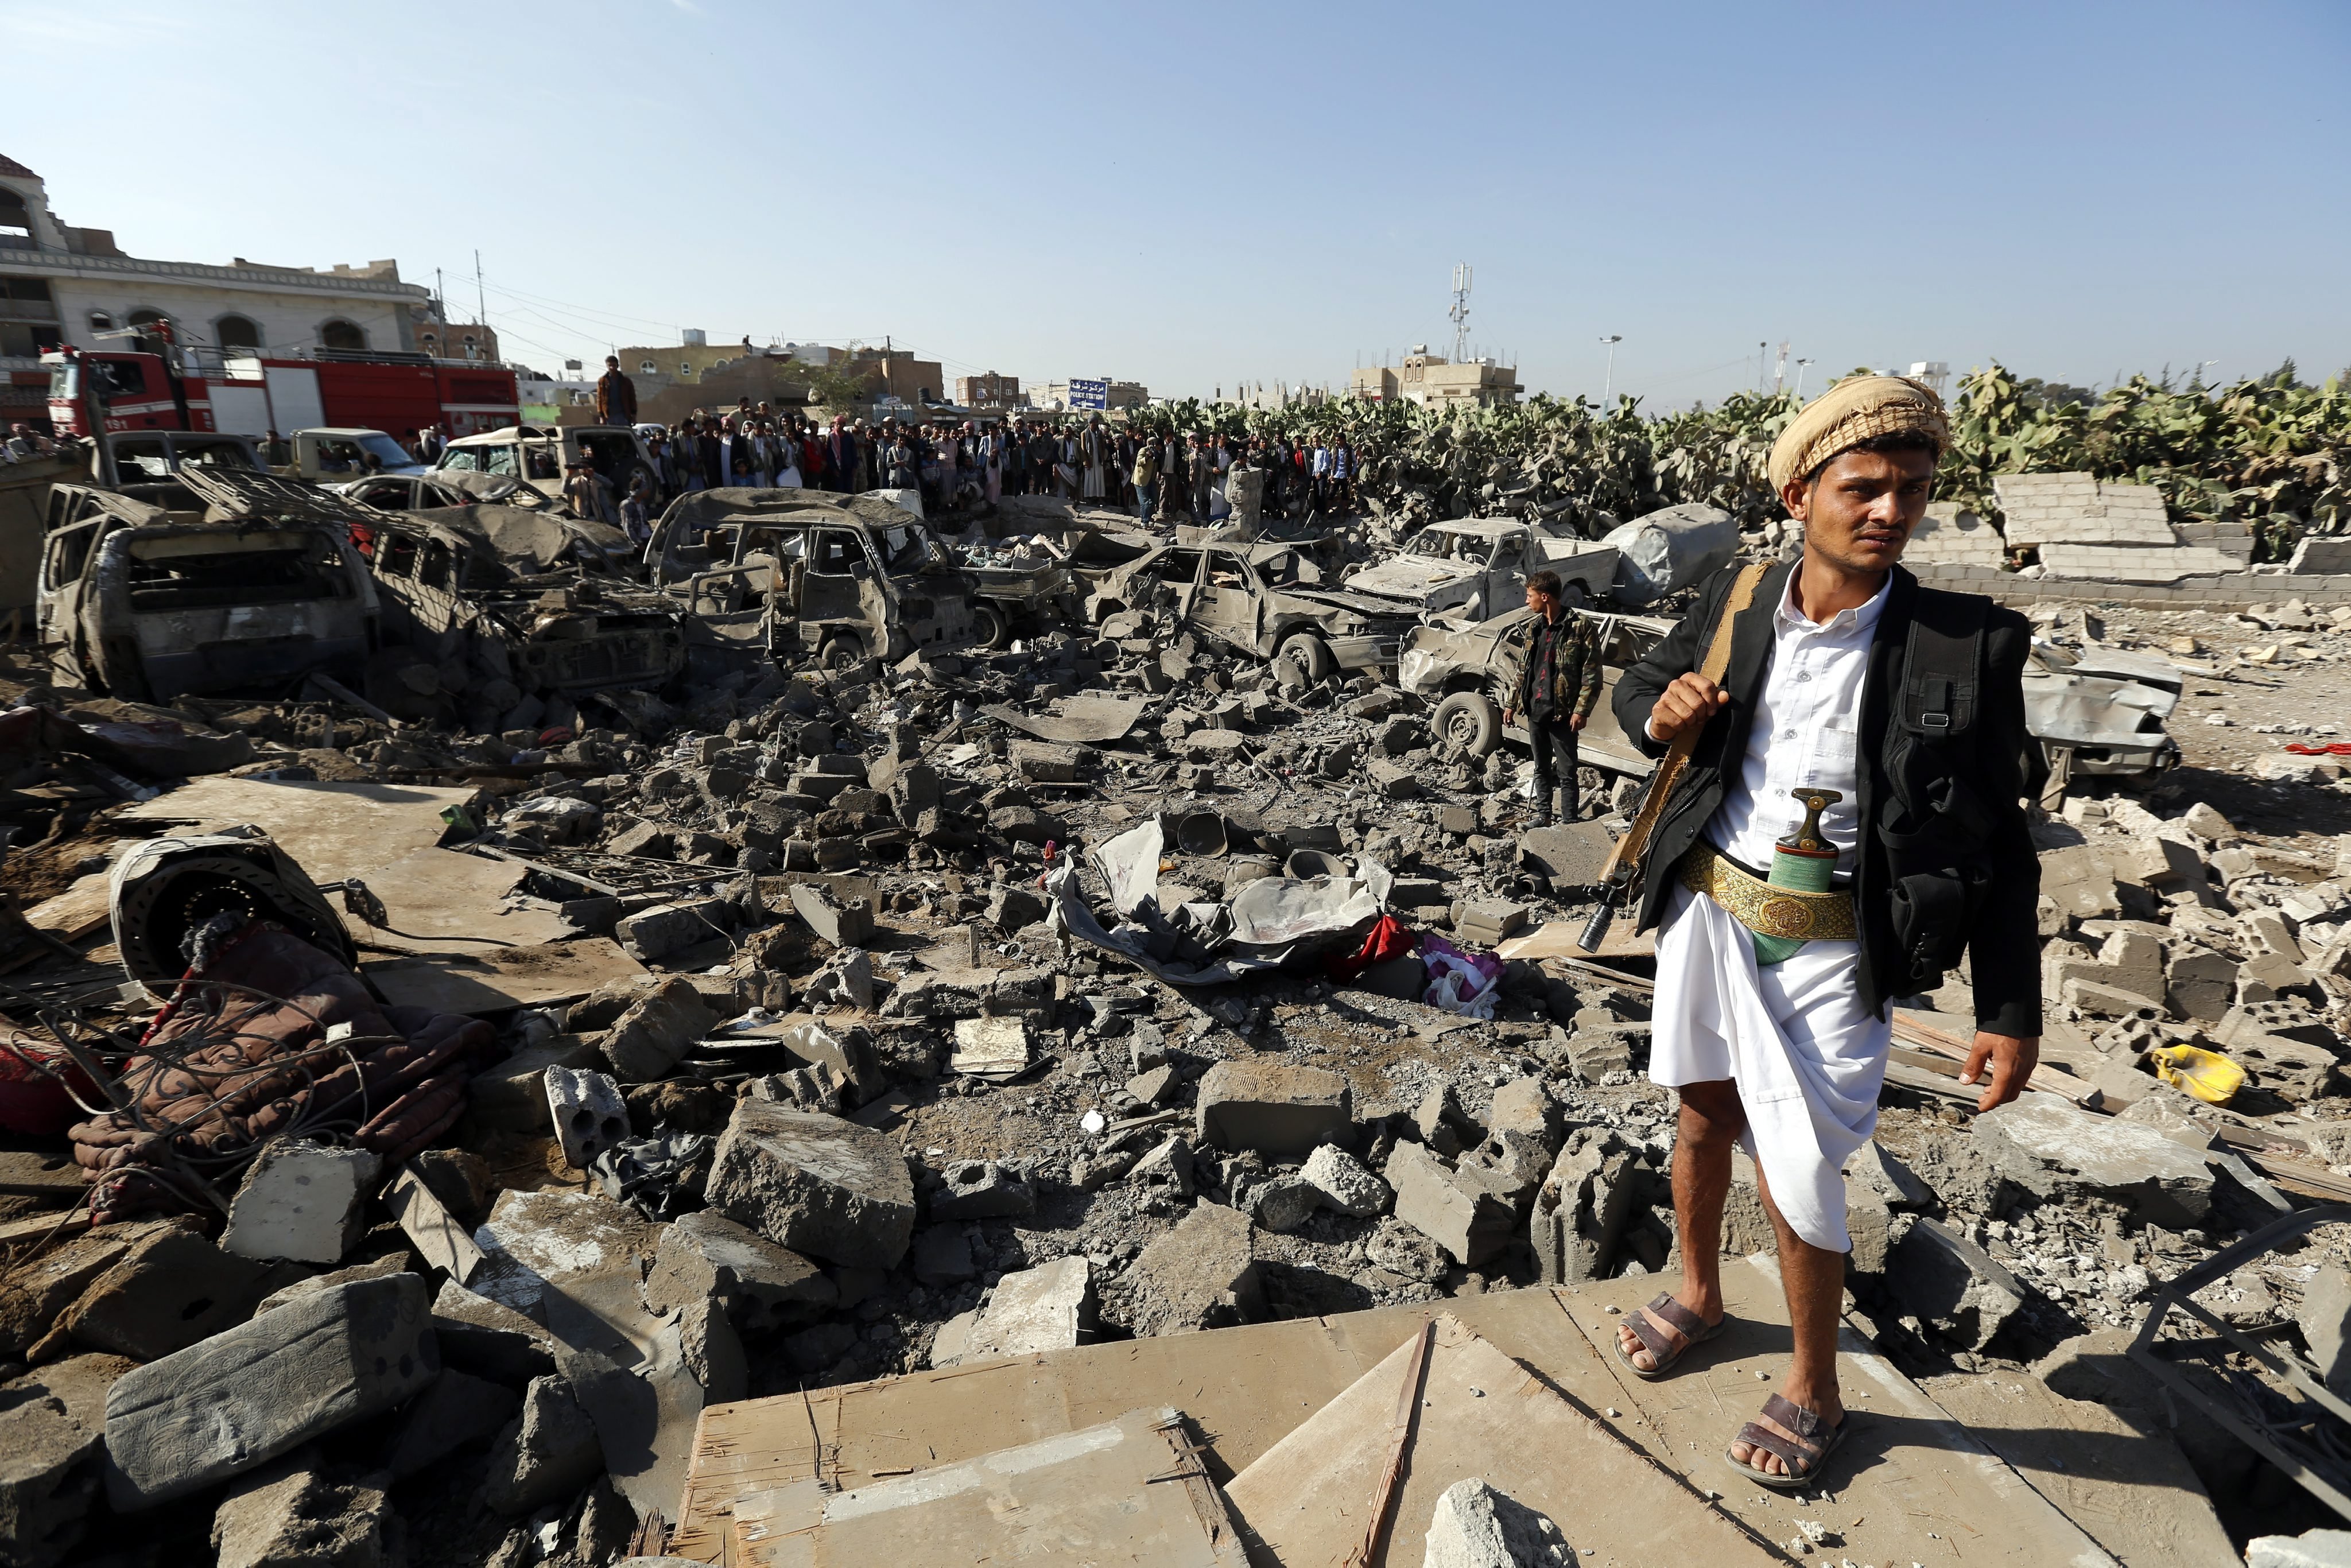 An armed member of Houthi militia (R) keeps watch as people gather beside vehicles which were allegedly destroyed by a Saudi air strike, in Sana'a, Yemen on March 26, 2015.